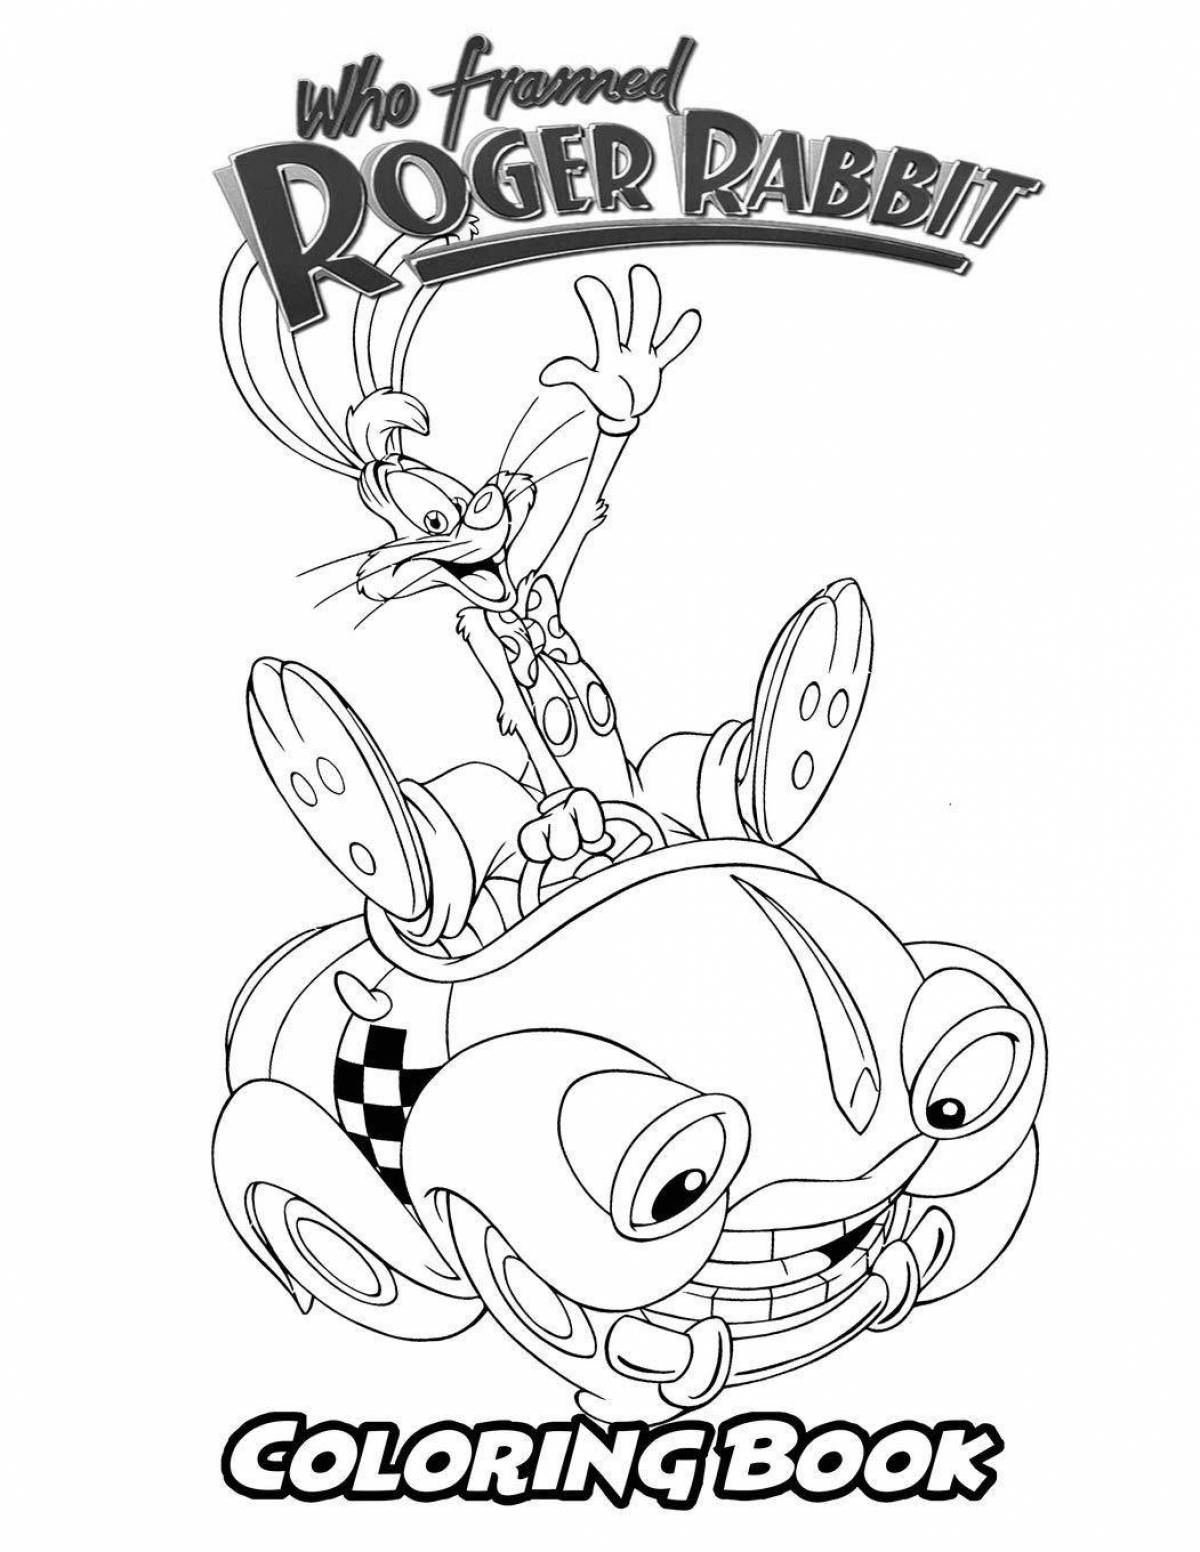 Majestic roger rabbit coloring page